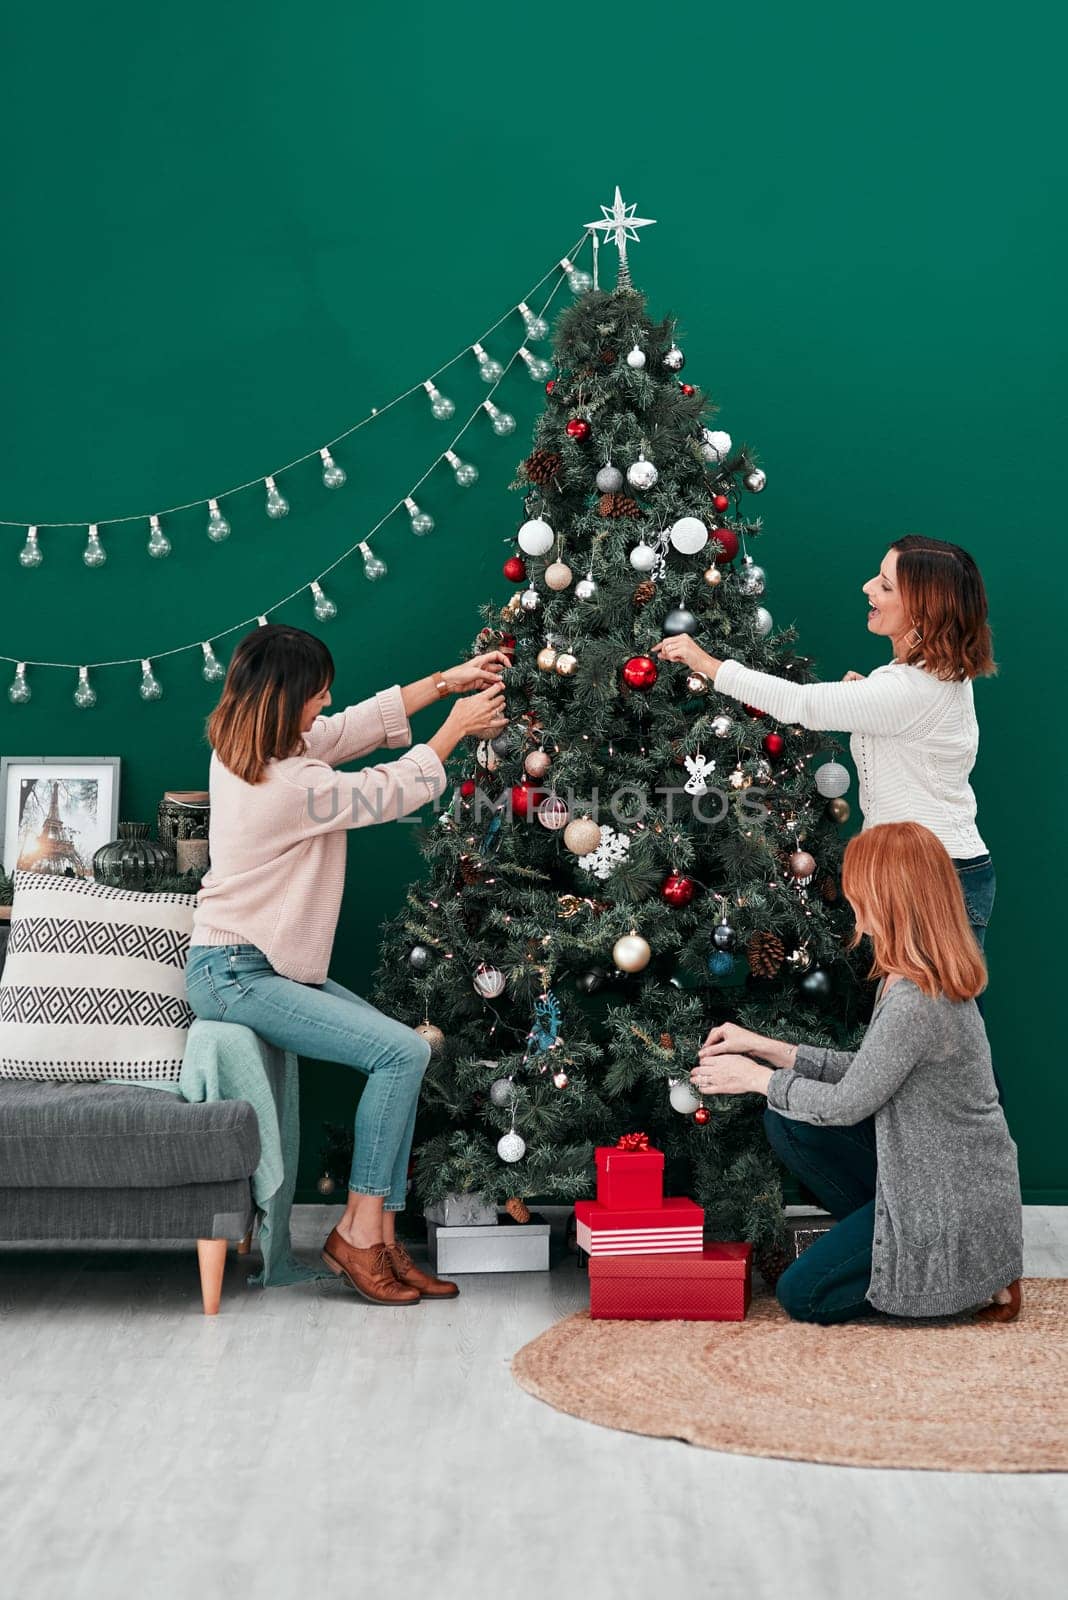 An art expression of festive excitement. three attractive women decorating a Christmas tree together at home